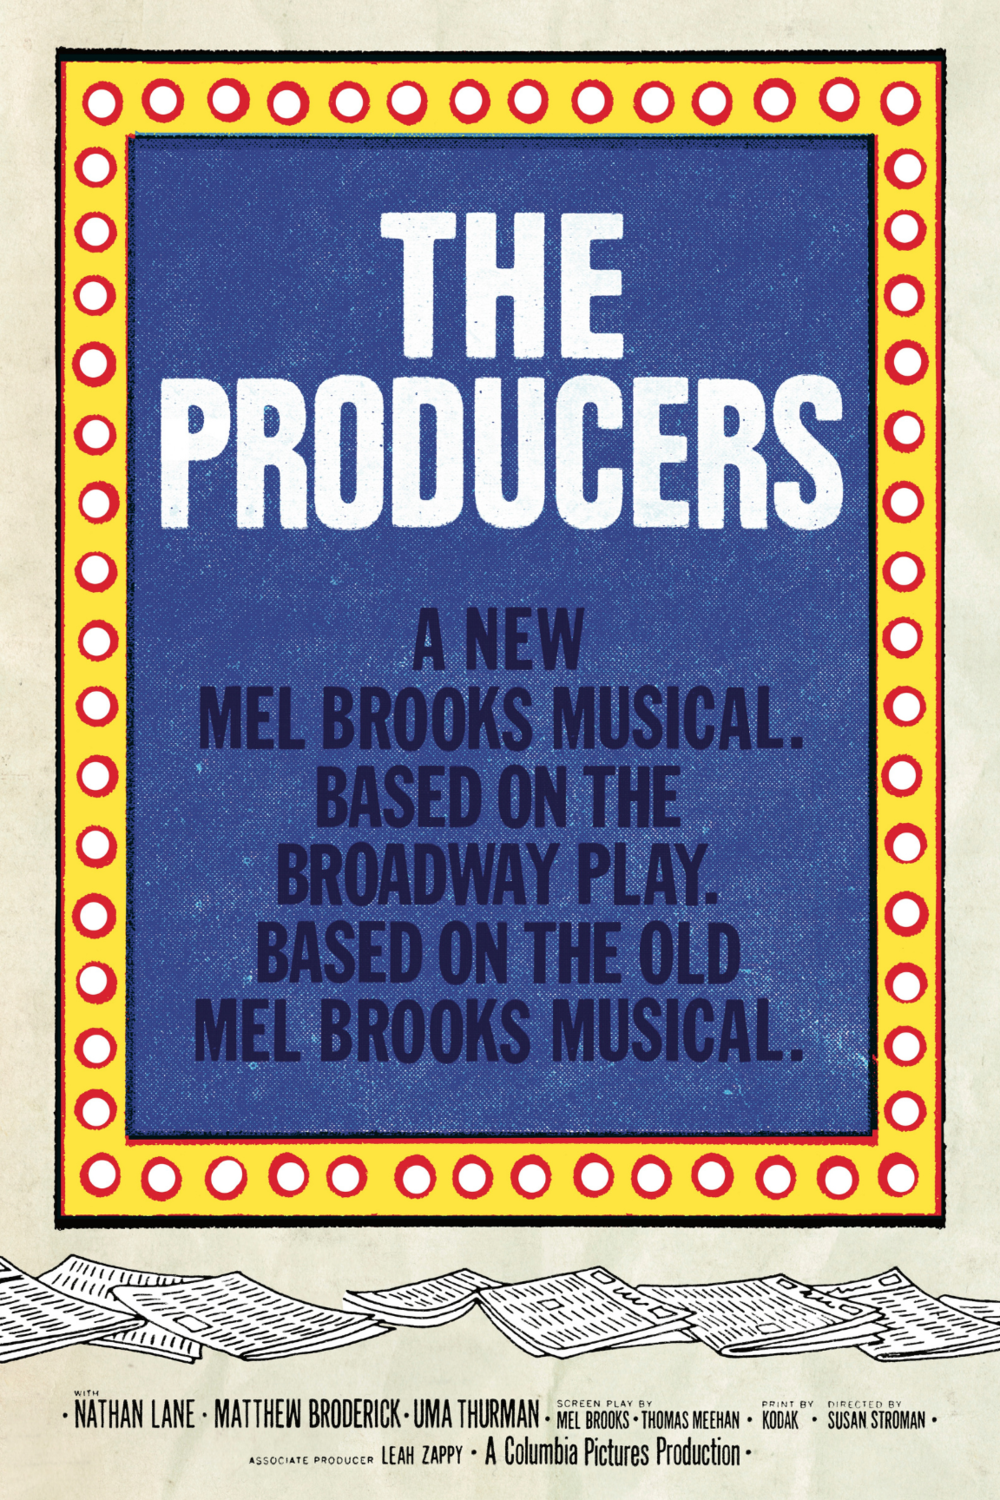 THE PRODUCERS Poster - Spencer Smith